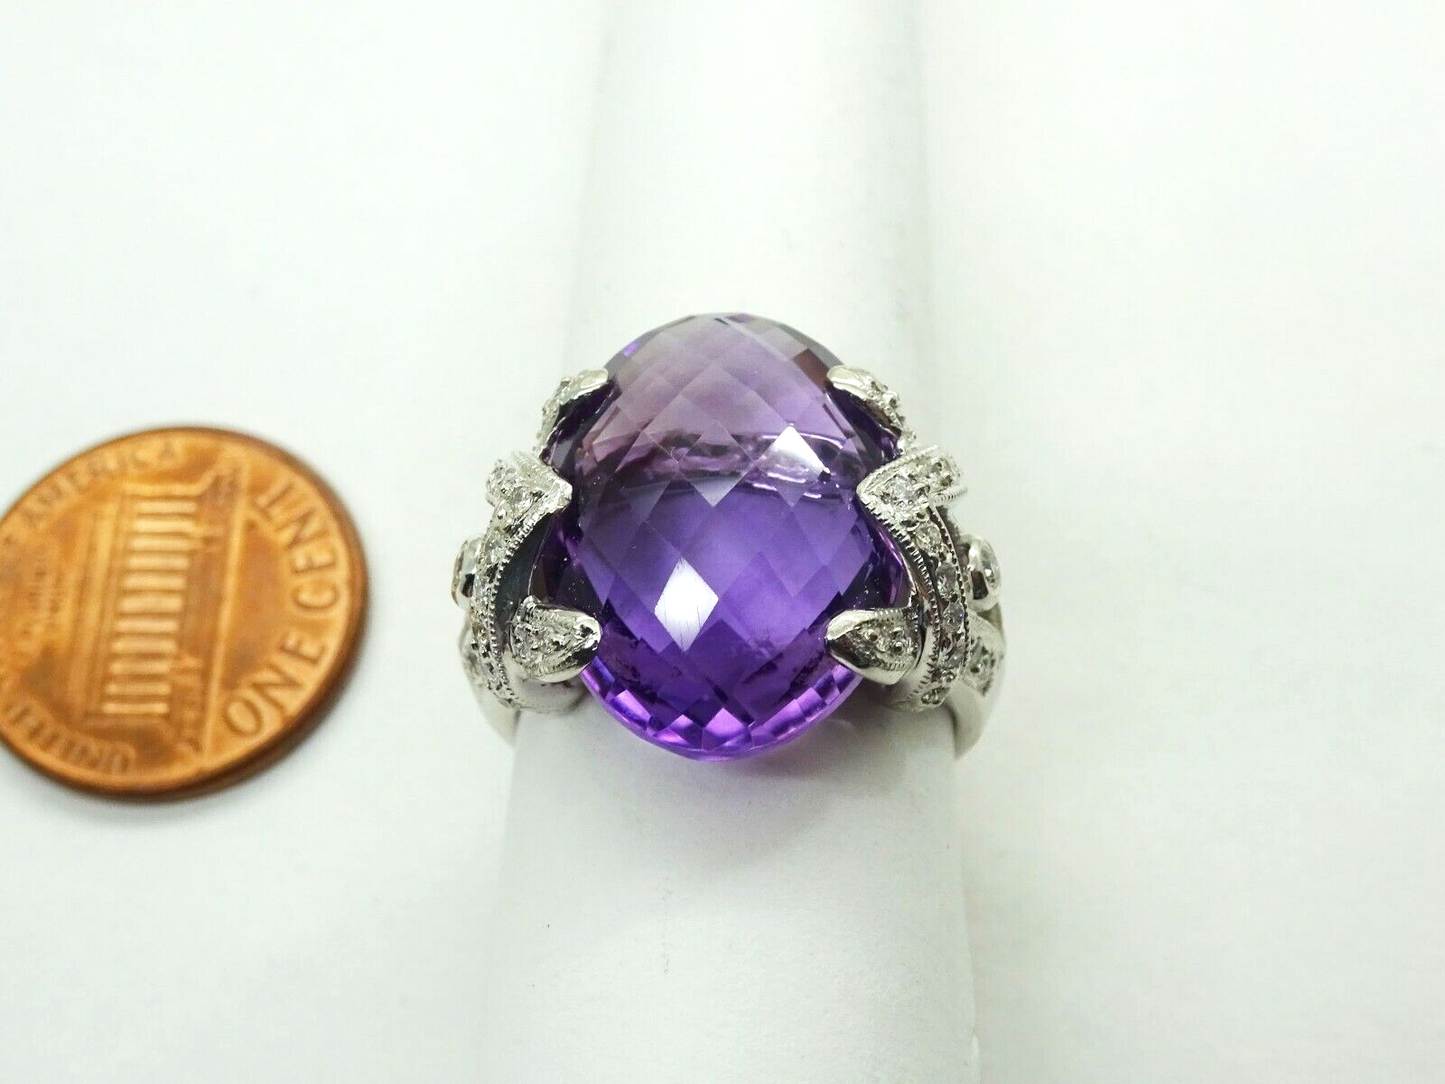 10.5ct tw Fancy Natural Amethyst & Diamond Accent Ring 14k White Gold Size 7.25